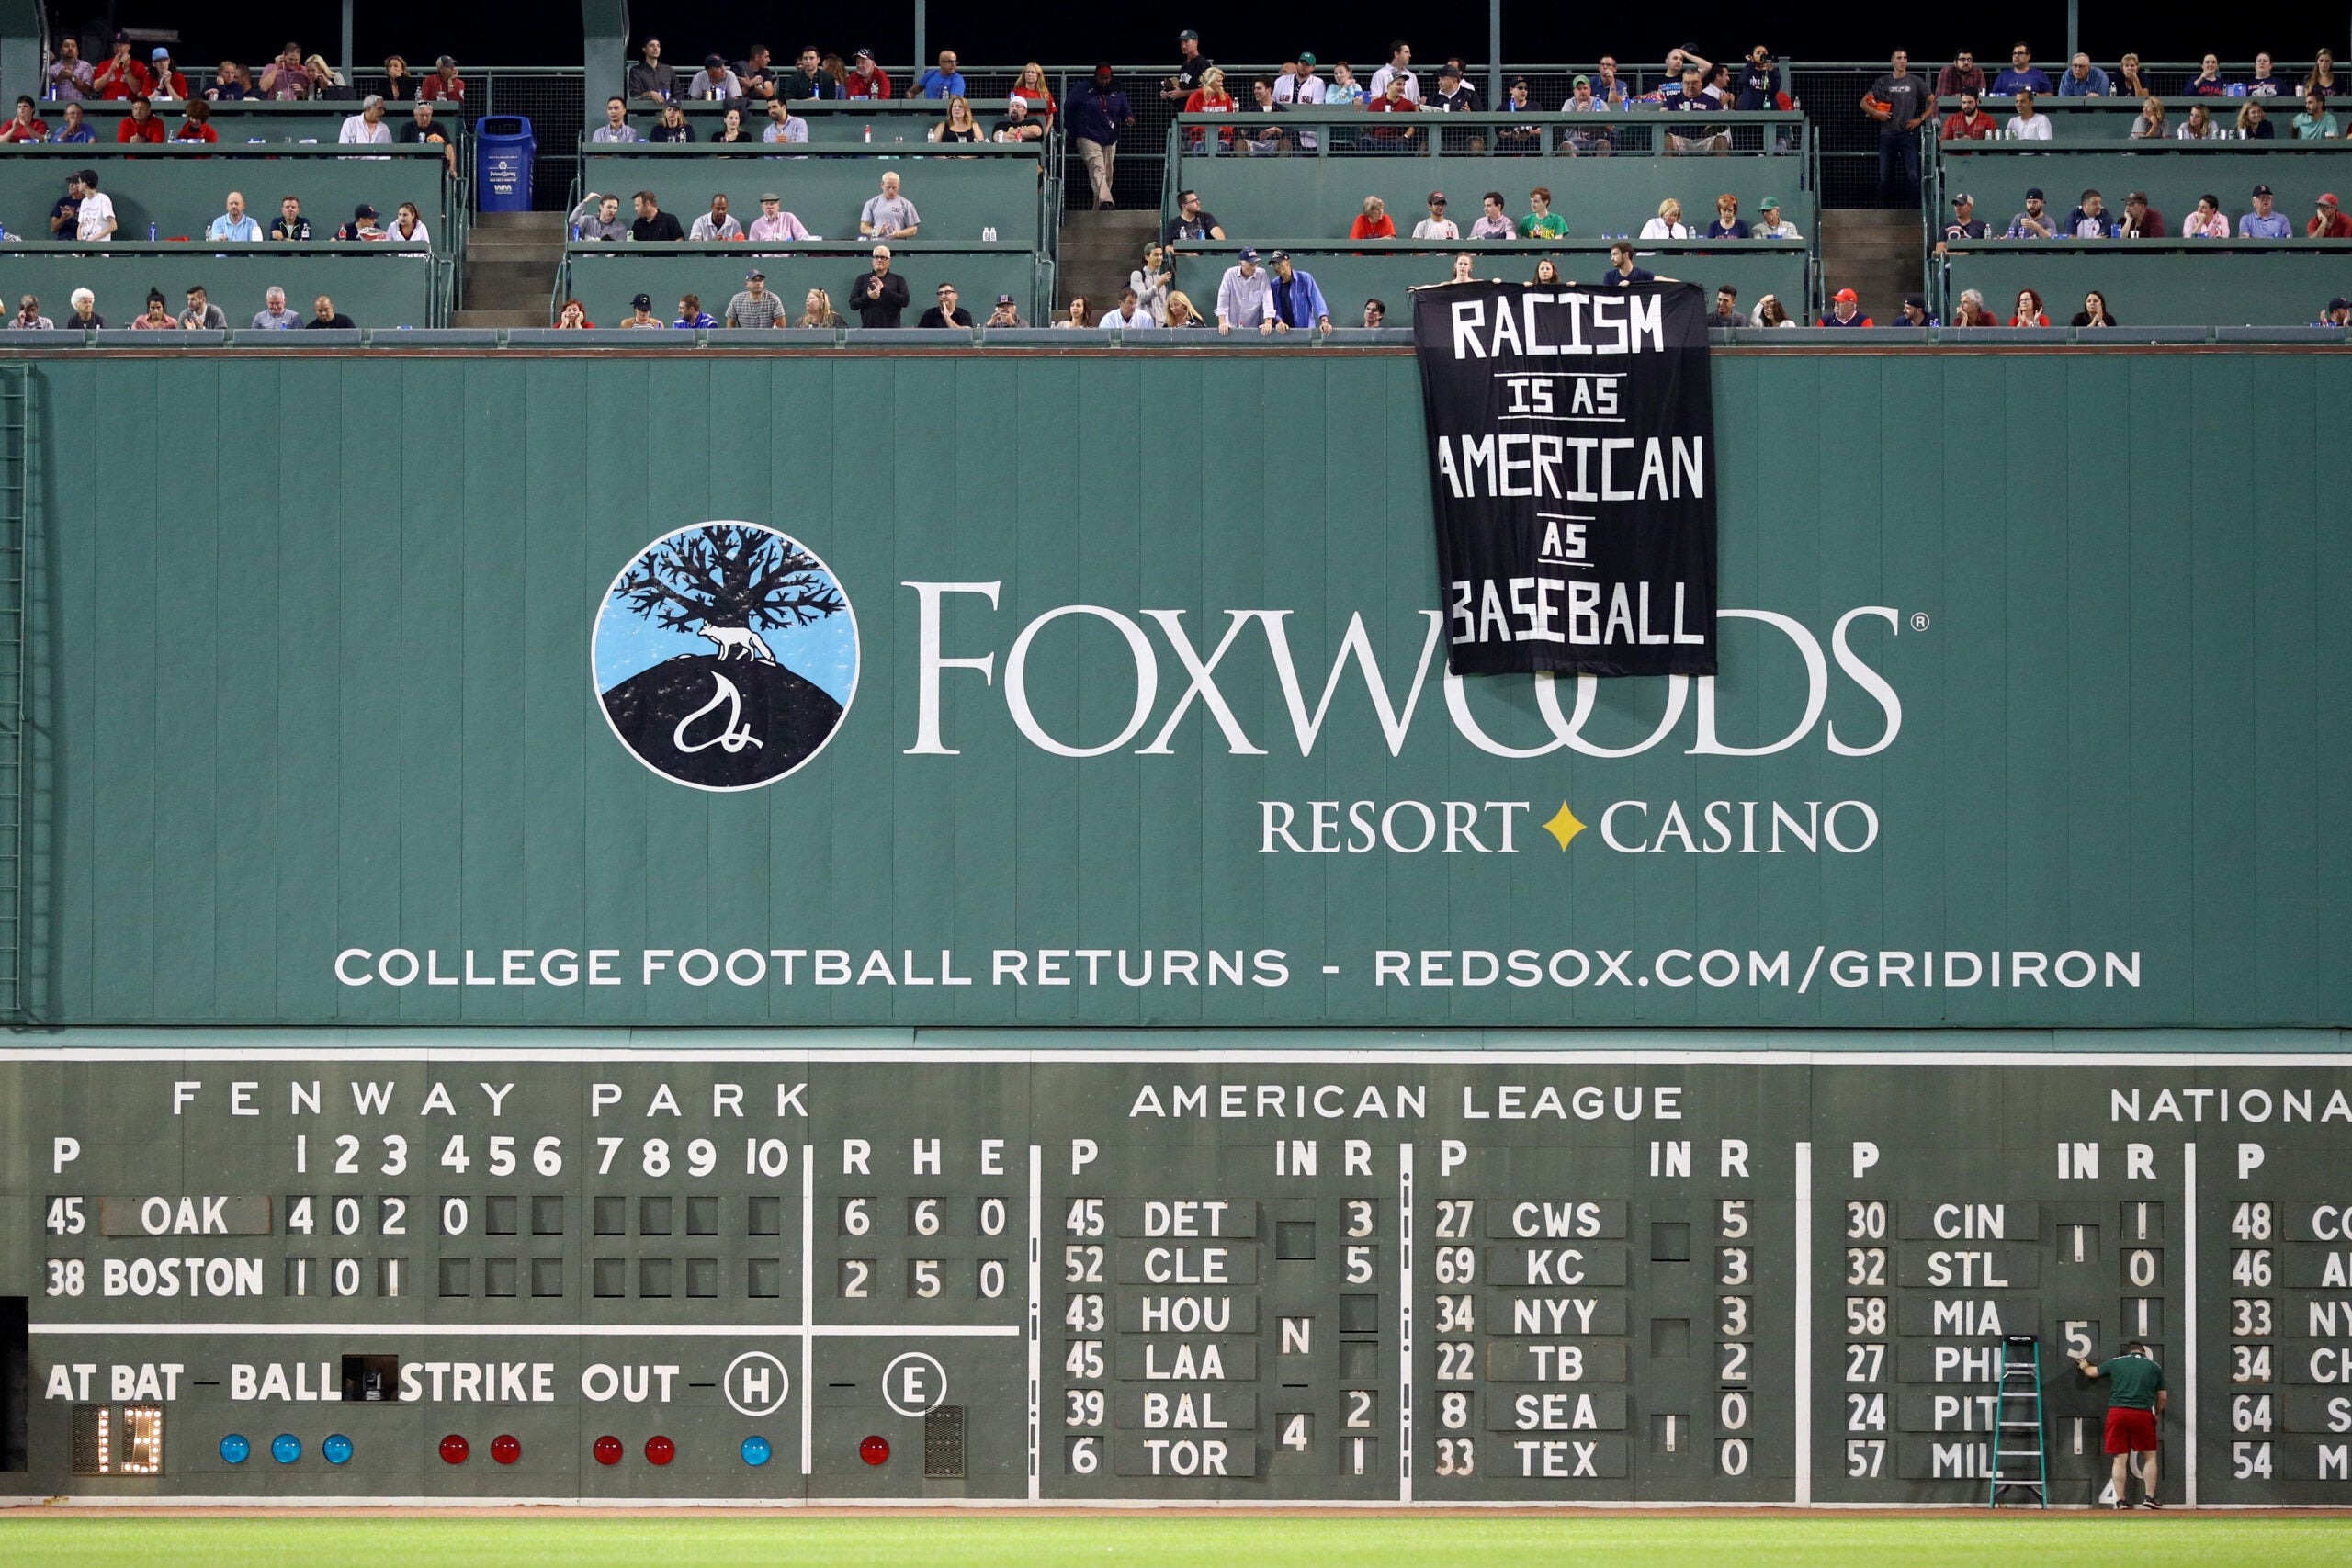 Racism has been a pervasive topic at Fenway Park this season